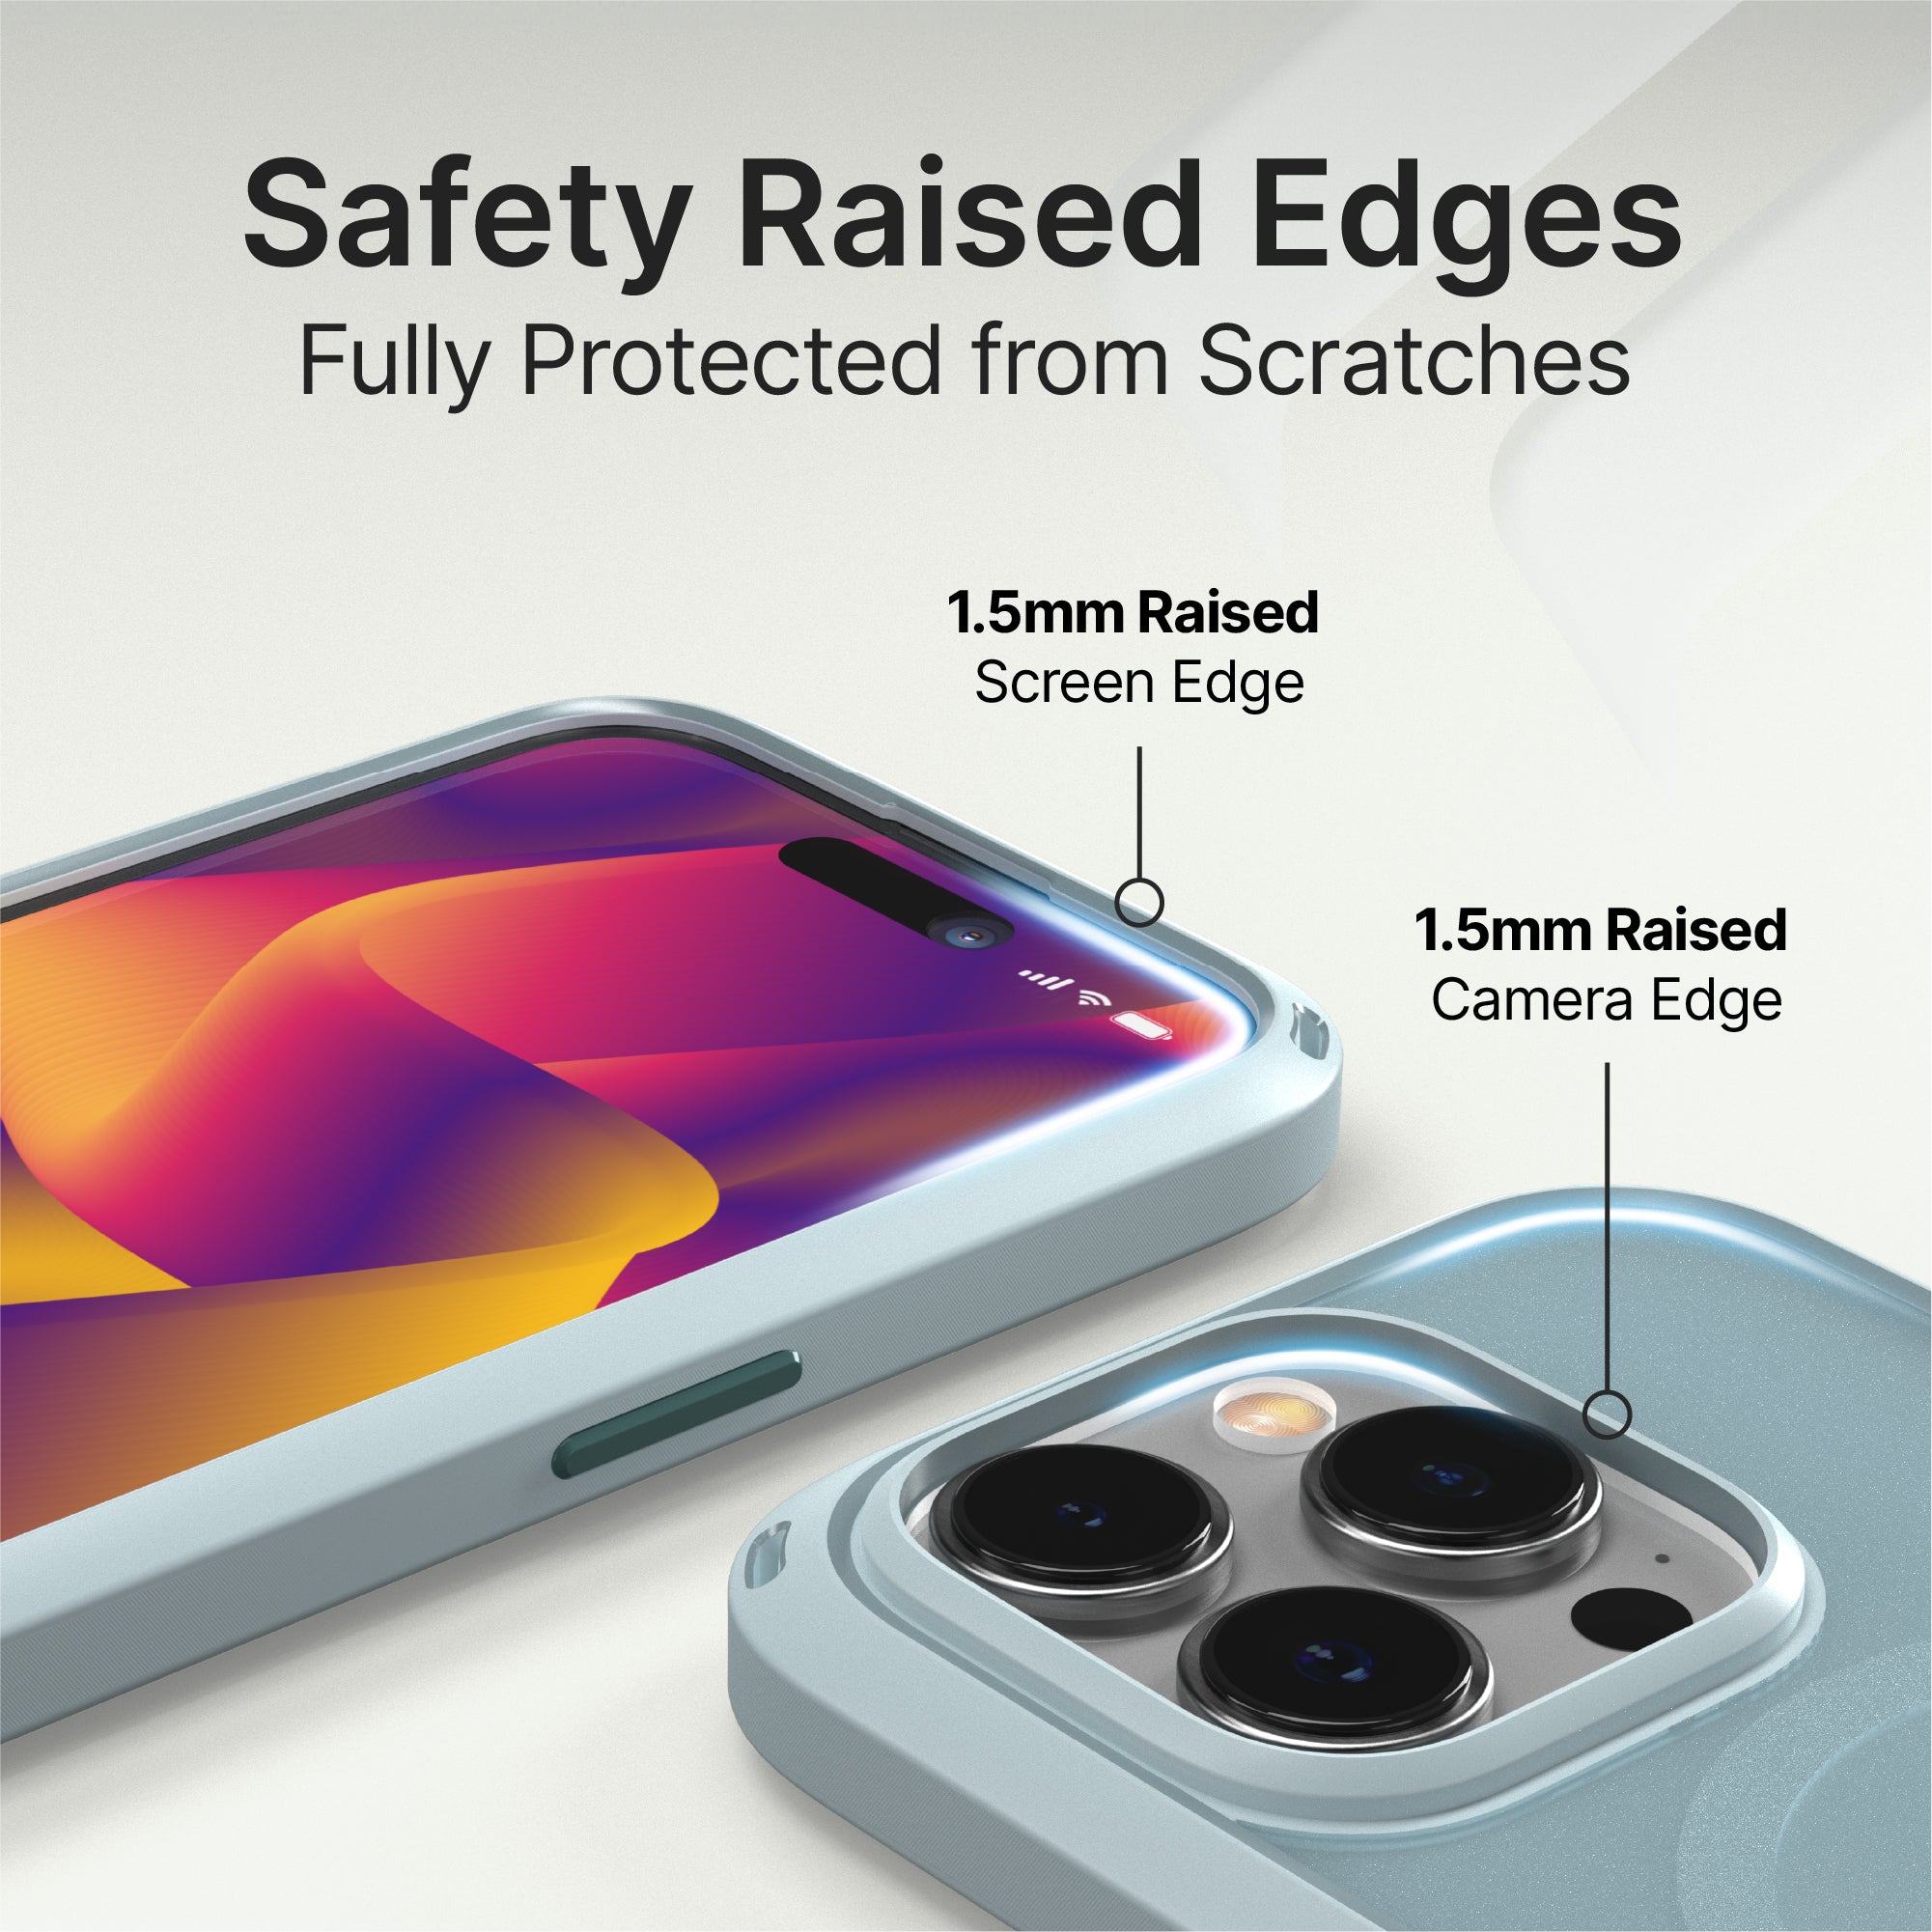 catalyst iphone 15 series influence case magsafe compatible sage green for iphone 15 pro showing the safety raised edges for camera and screen text reads safety raised edges fully protected from scratches 1.5mm raised screen edge 1.5mm raised camera edge